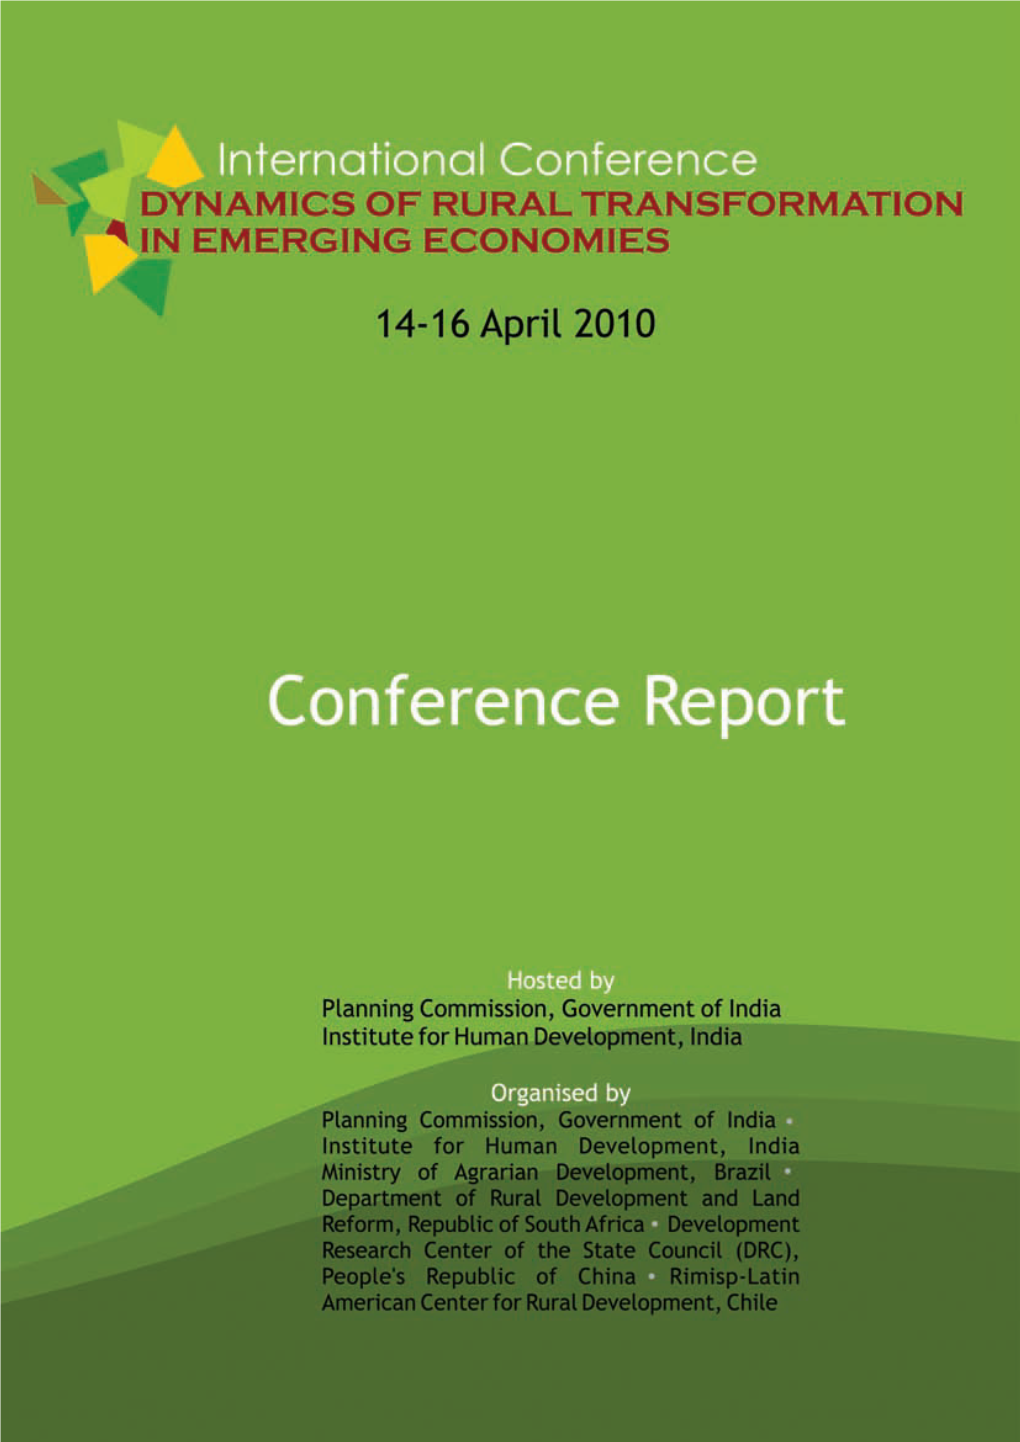 Conference Report Contents